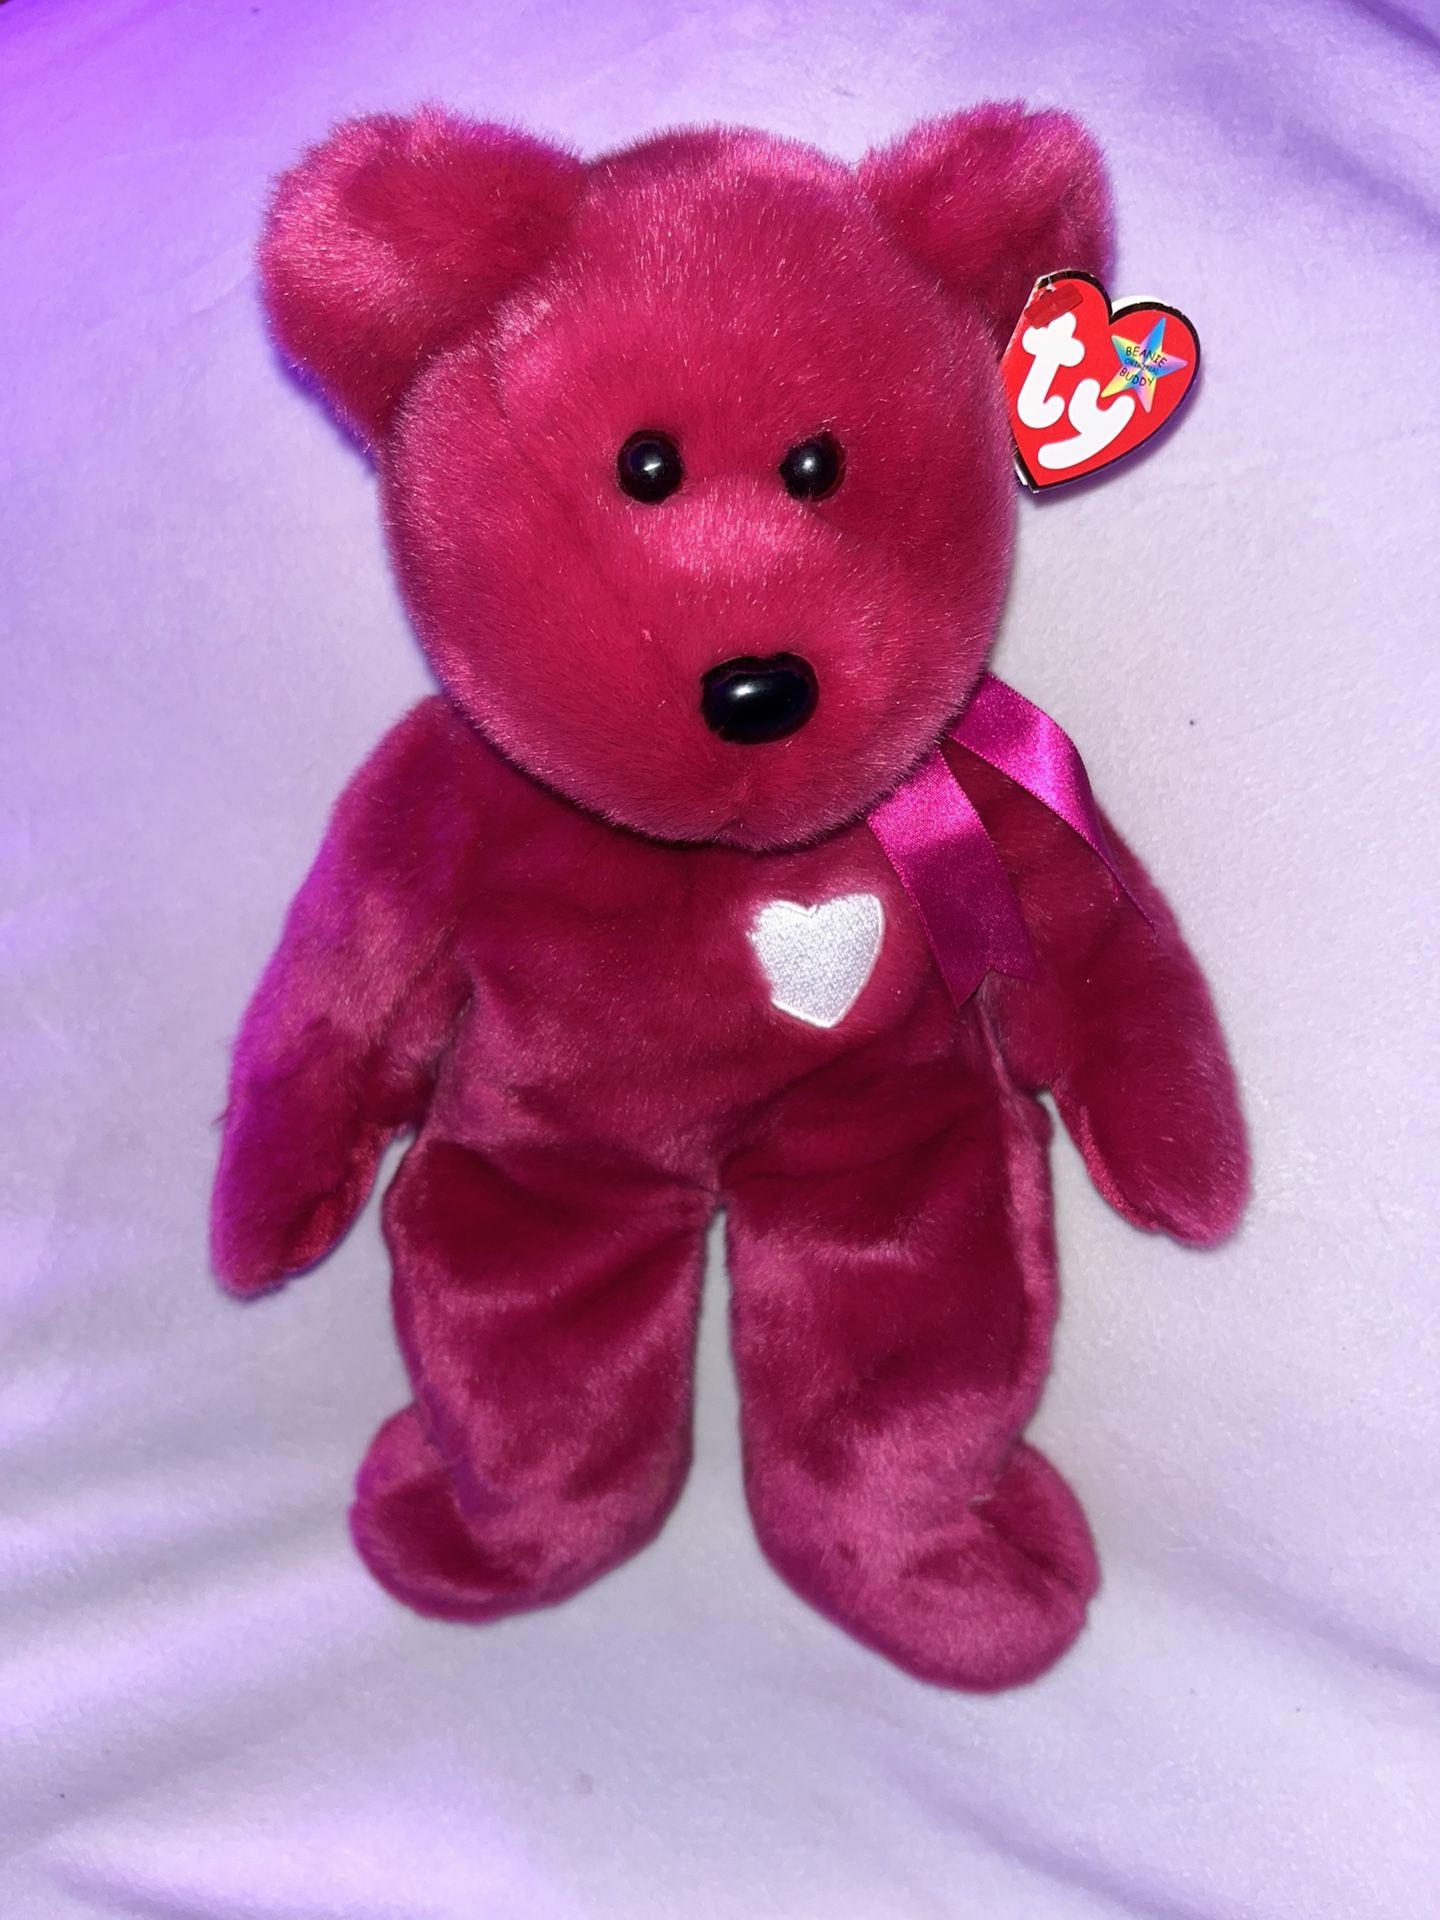 Vintage VALENTINA TY Beanie Baby with Tags.